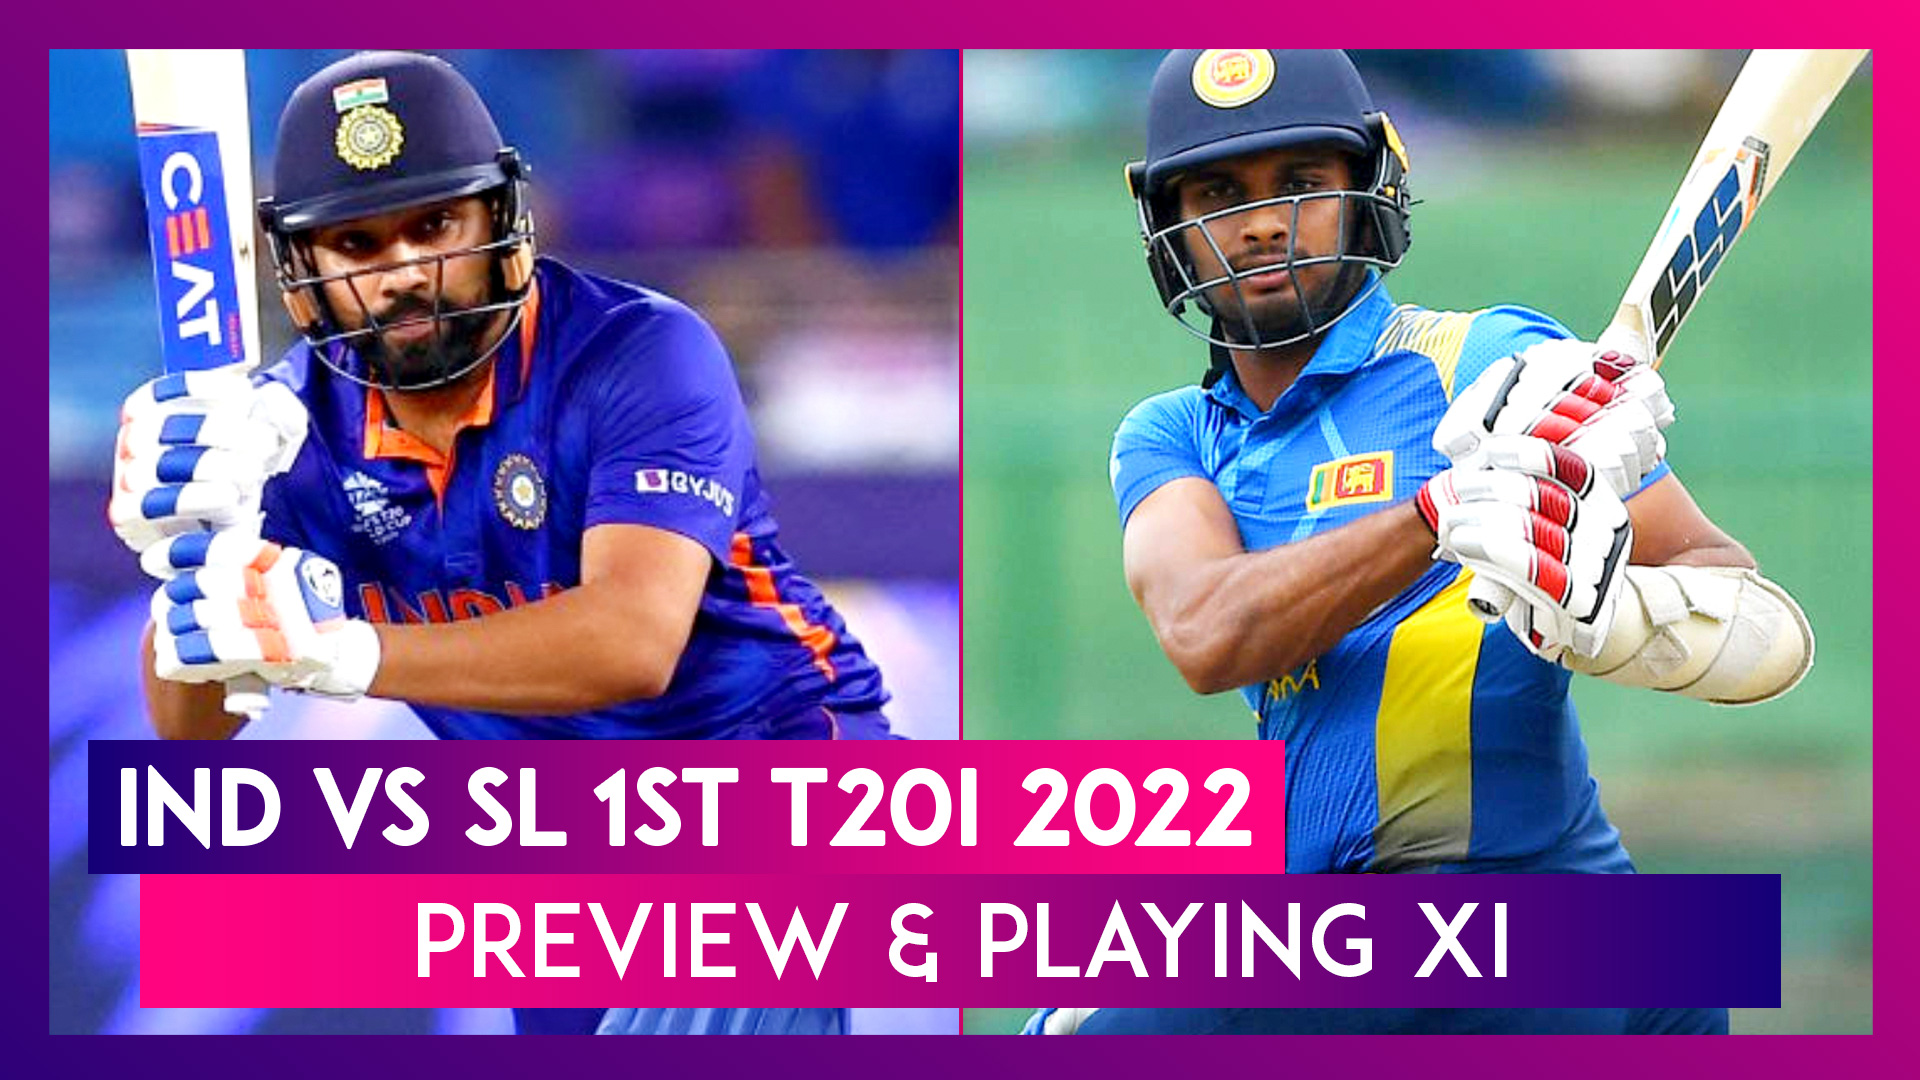 Iniya Xxx - IND vs SL 1st T20I 2022 Preview & Playing XI: Teams Aim for Winning Start |  ðŸ“¹ Watch Videos From LatestLY